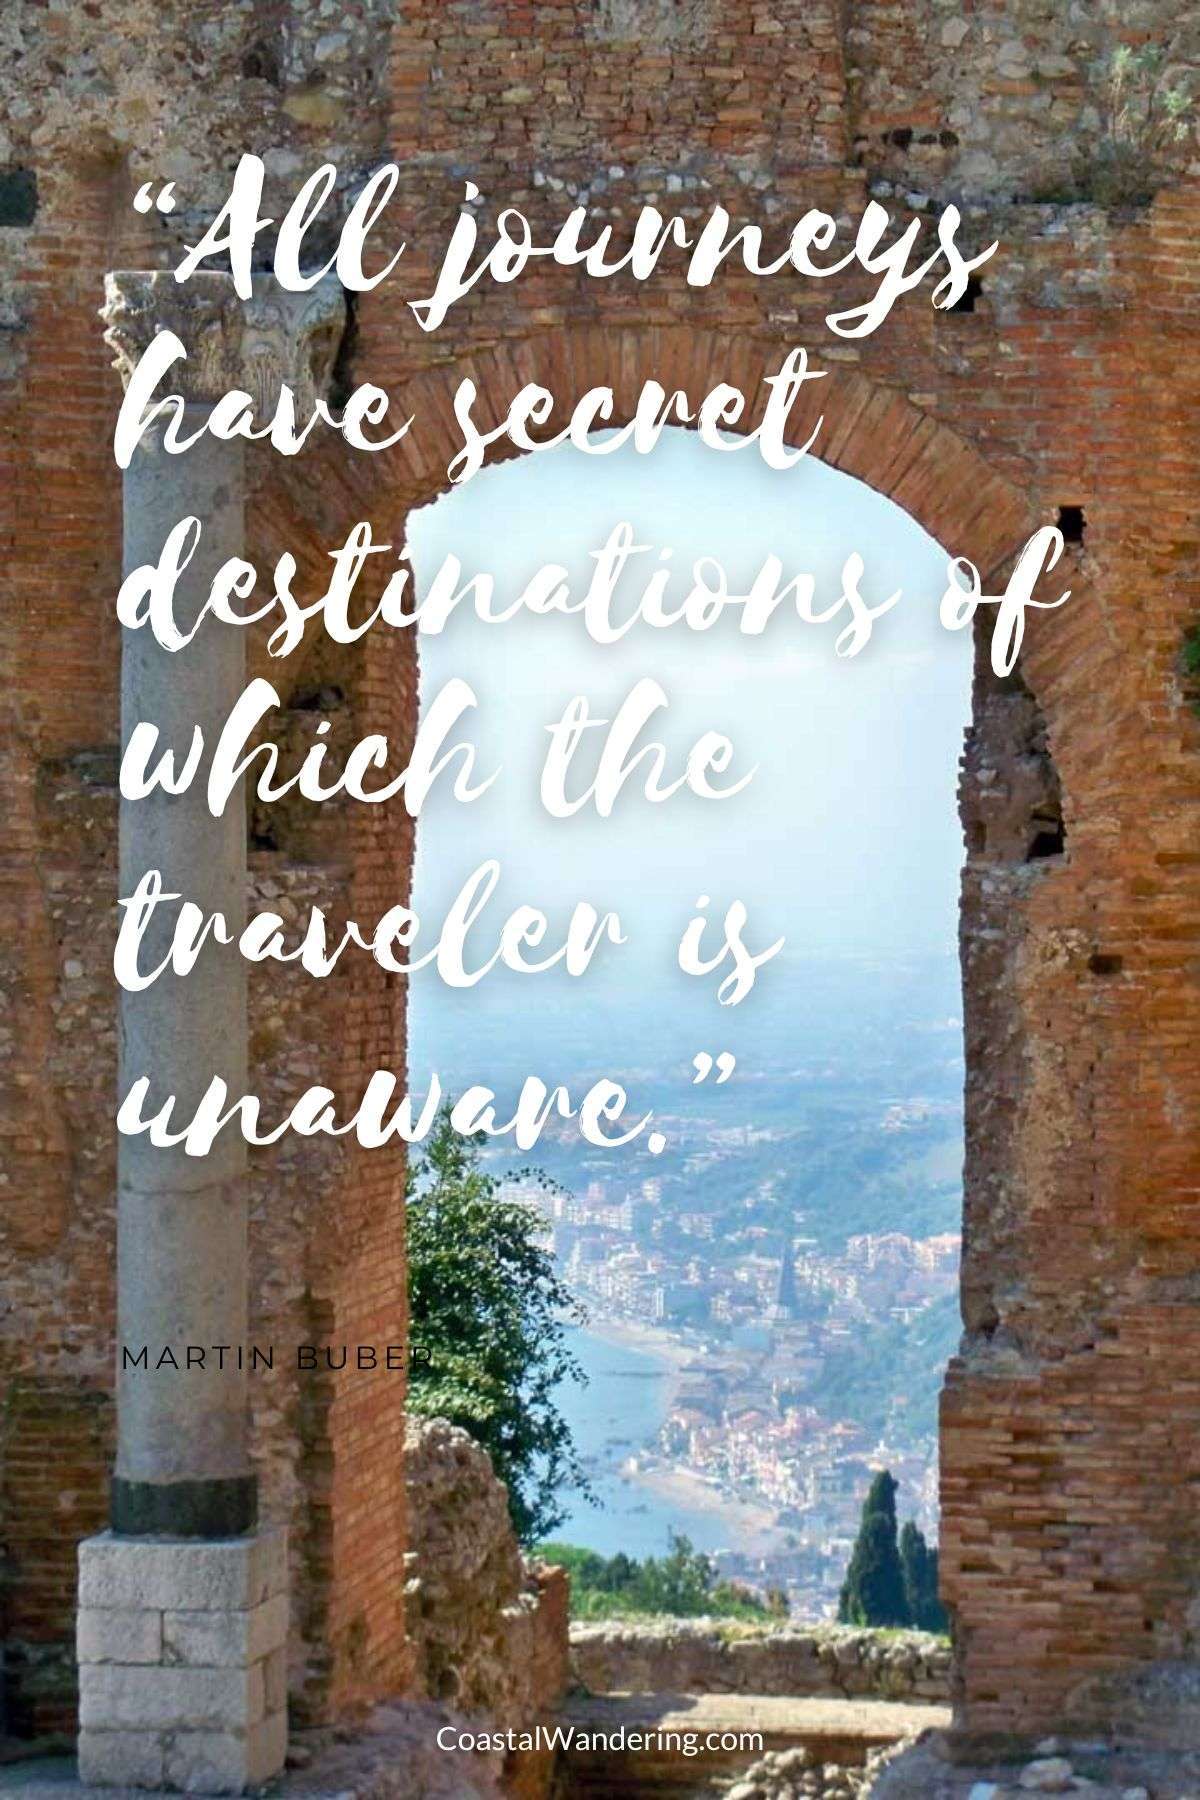 “All journeys have secret destinations of which the traveler is unaware.” 